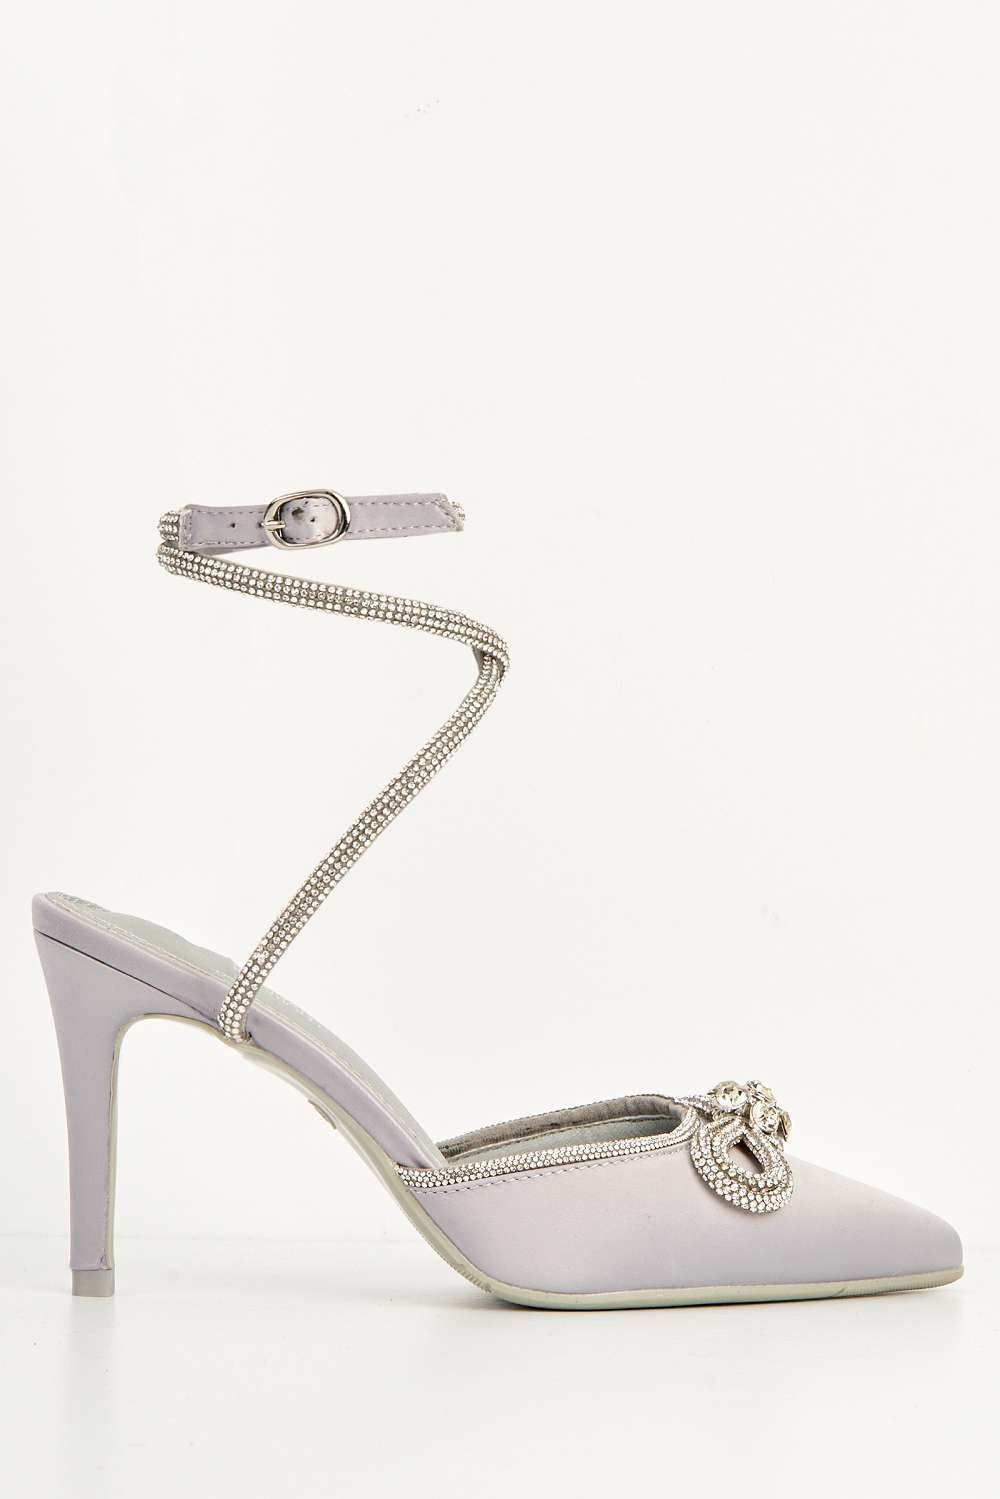 Miss Diva Natalie Pointed Toe Diamante Bow & Strap Court Shoe Heel in Silver